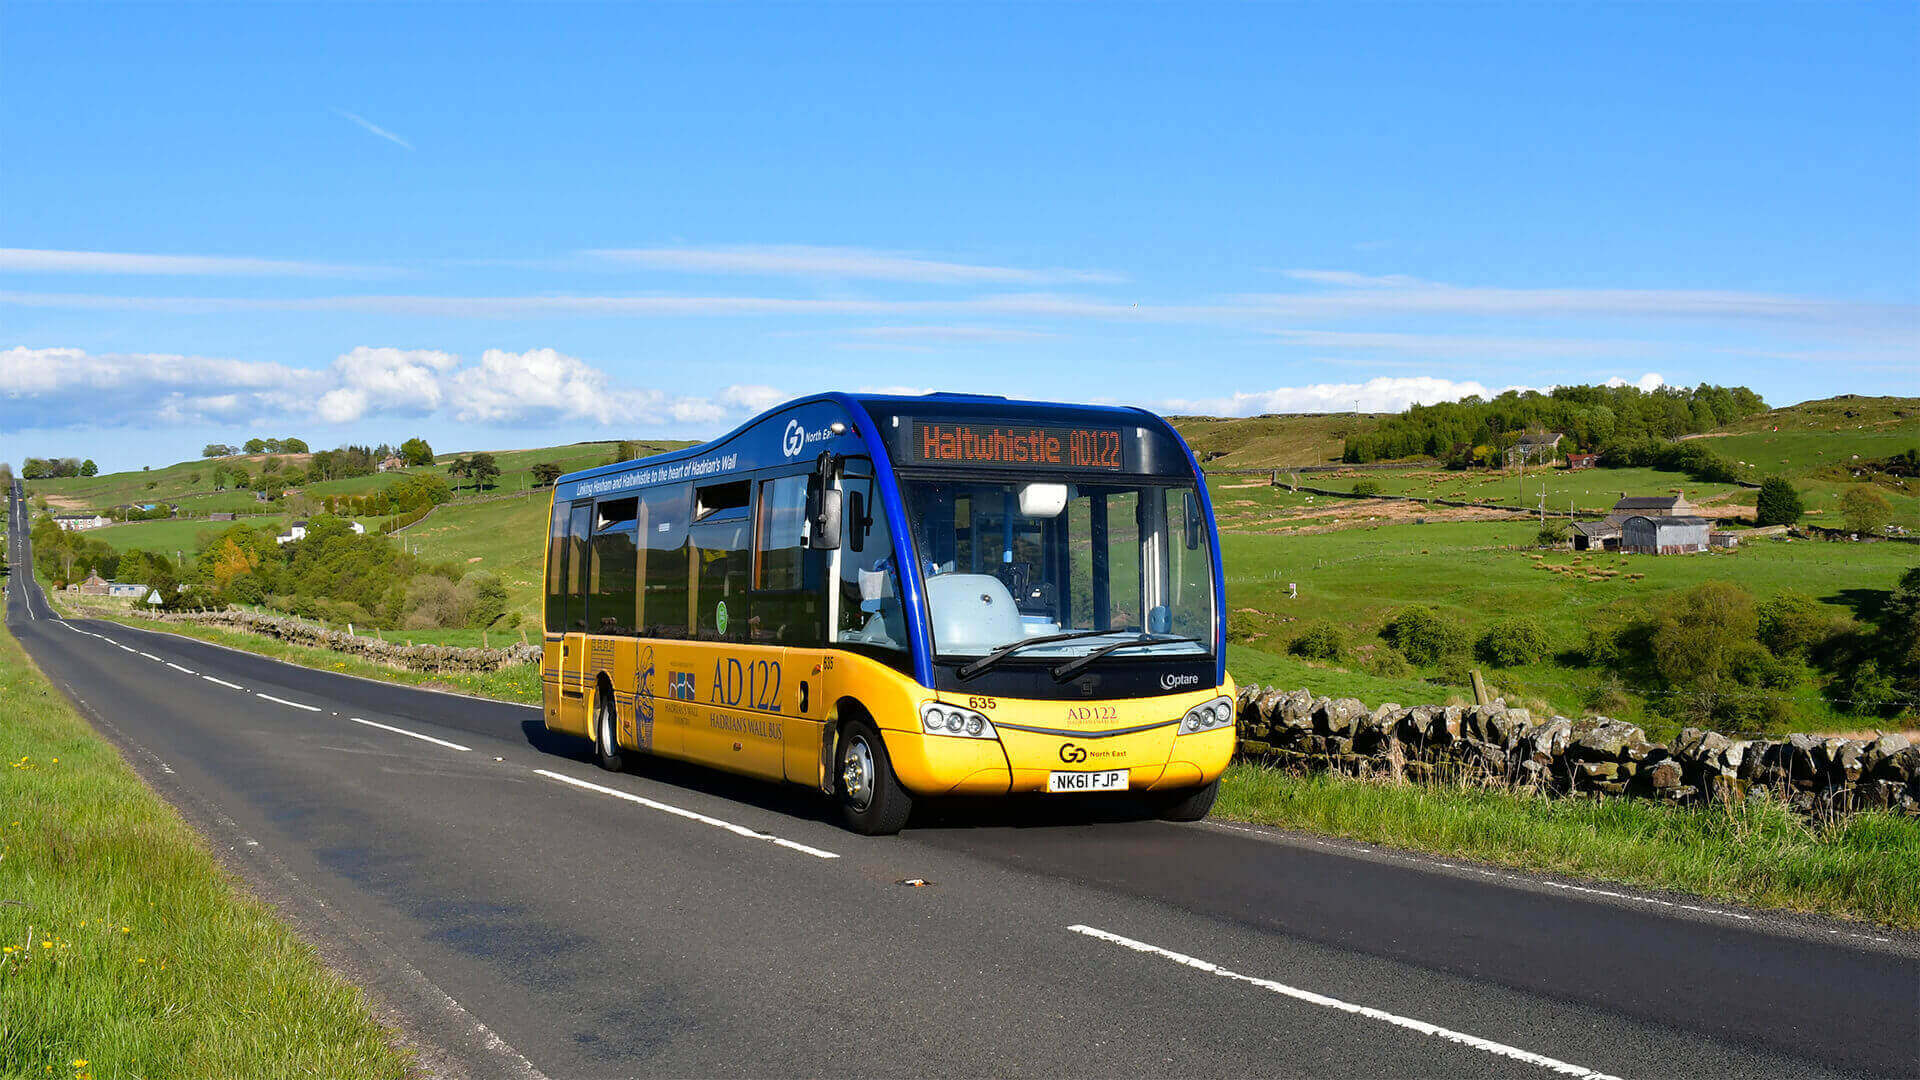 The AD122 Hadrian's Wall bus